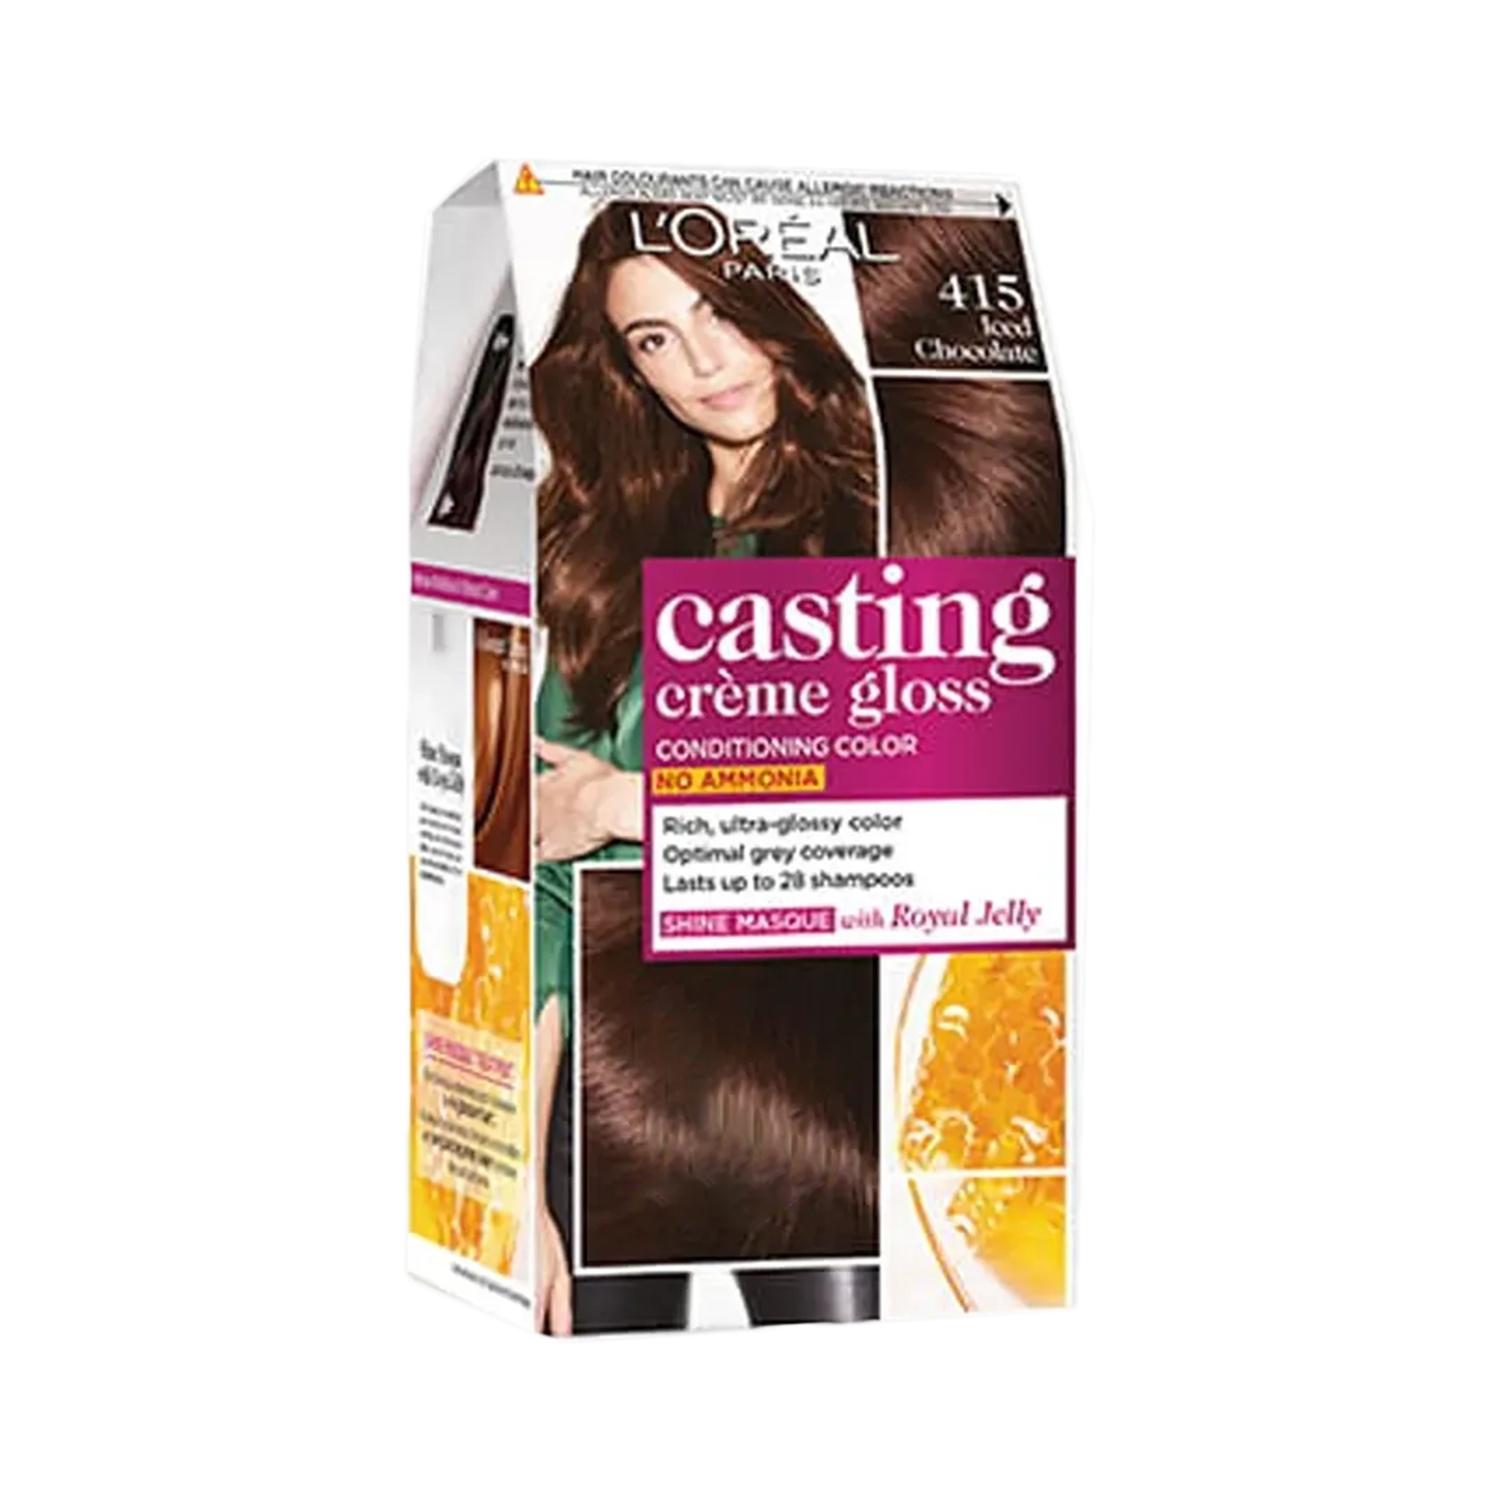 l'oreal-paris-casting-creme-gloss-hair-color,-415-iced-chocolate,-87.5g+72ml